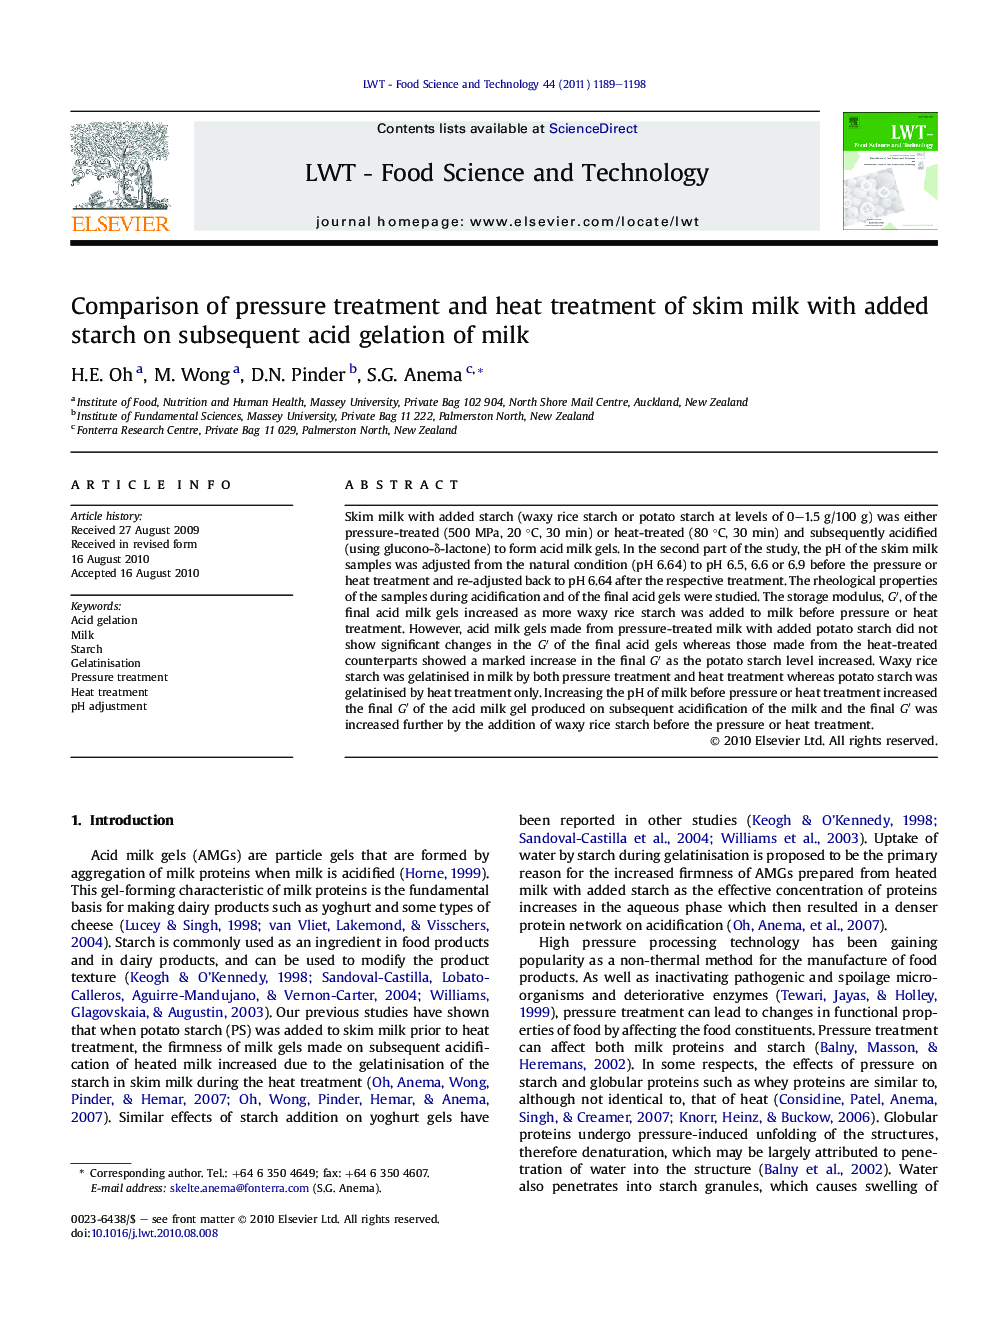 Comparison of pressure treatment and heat treatment of skim milk with added starch on subsequent acid gelation of milk